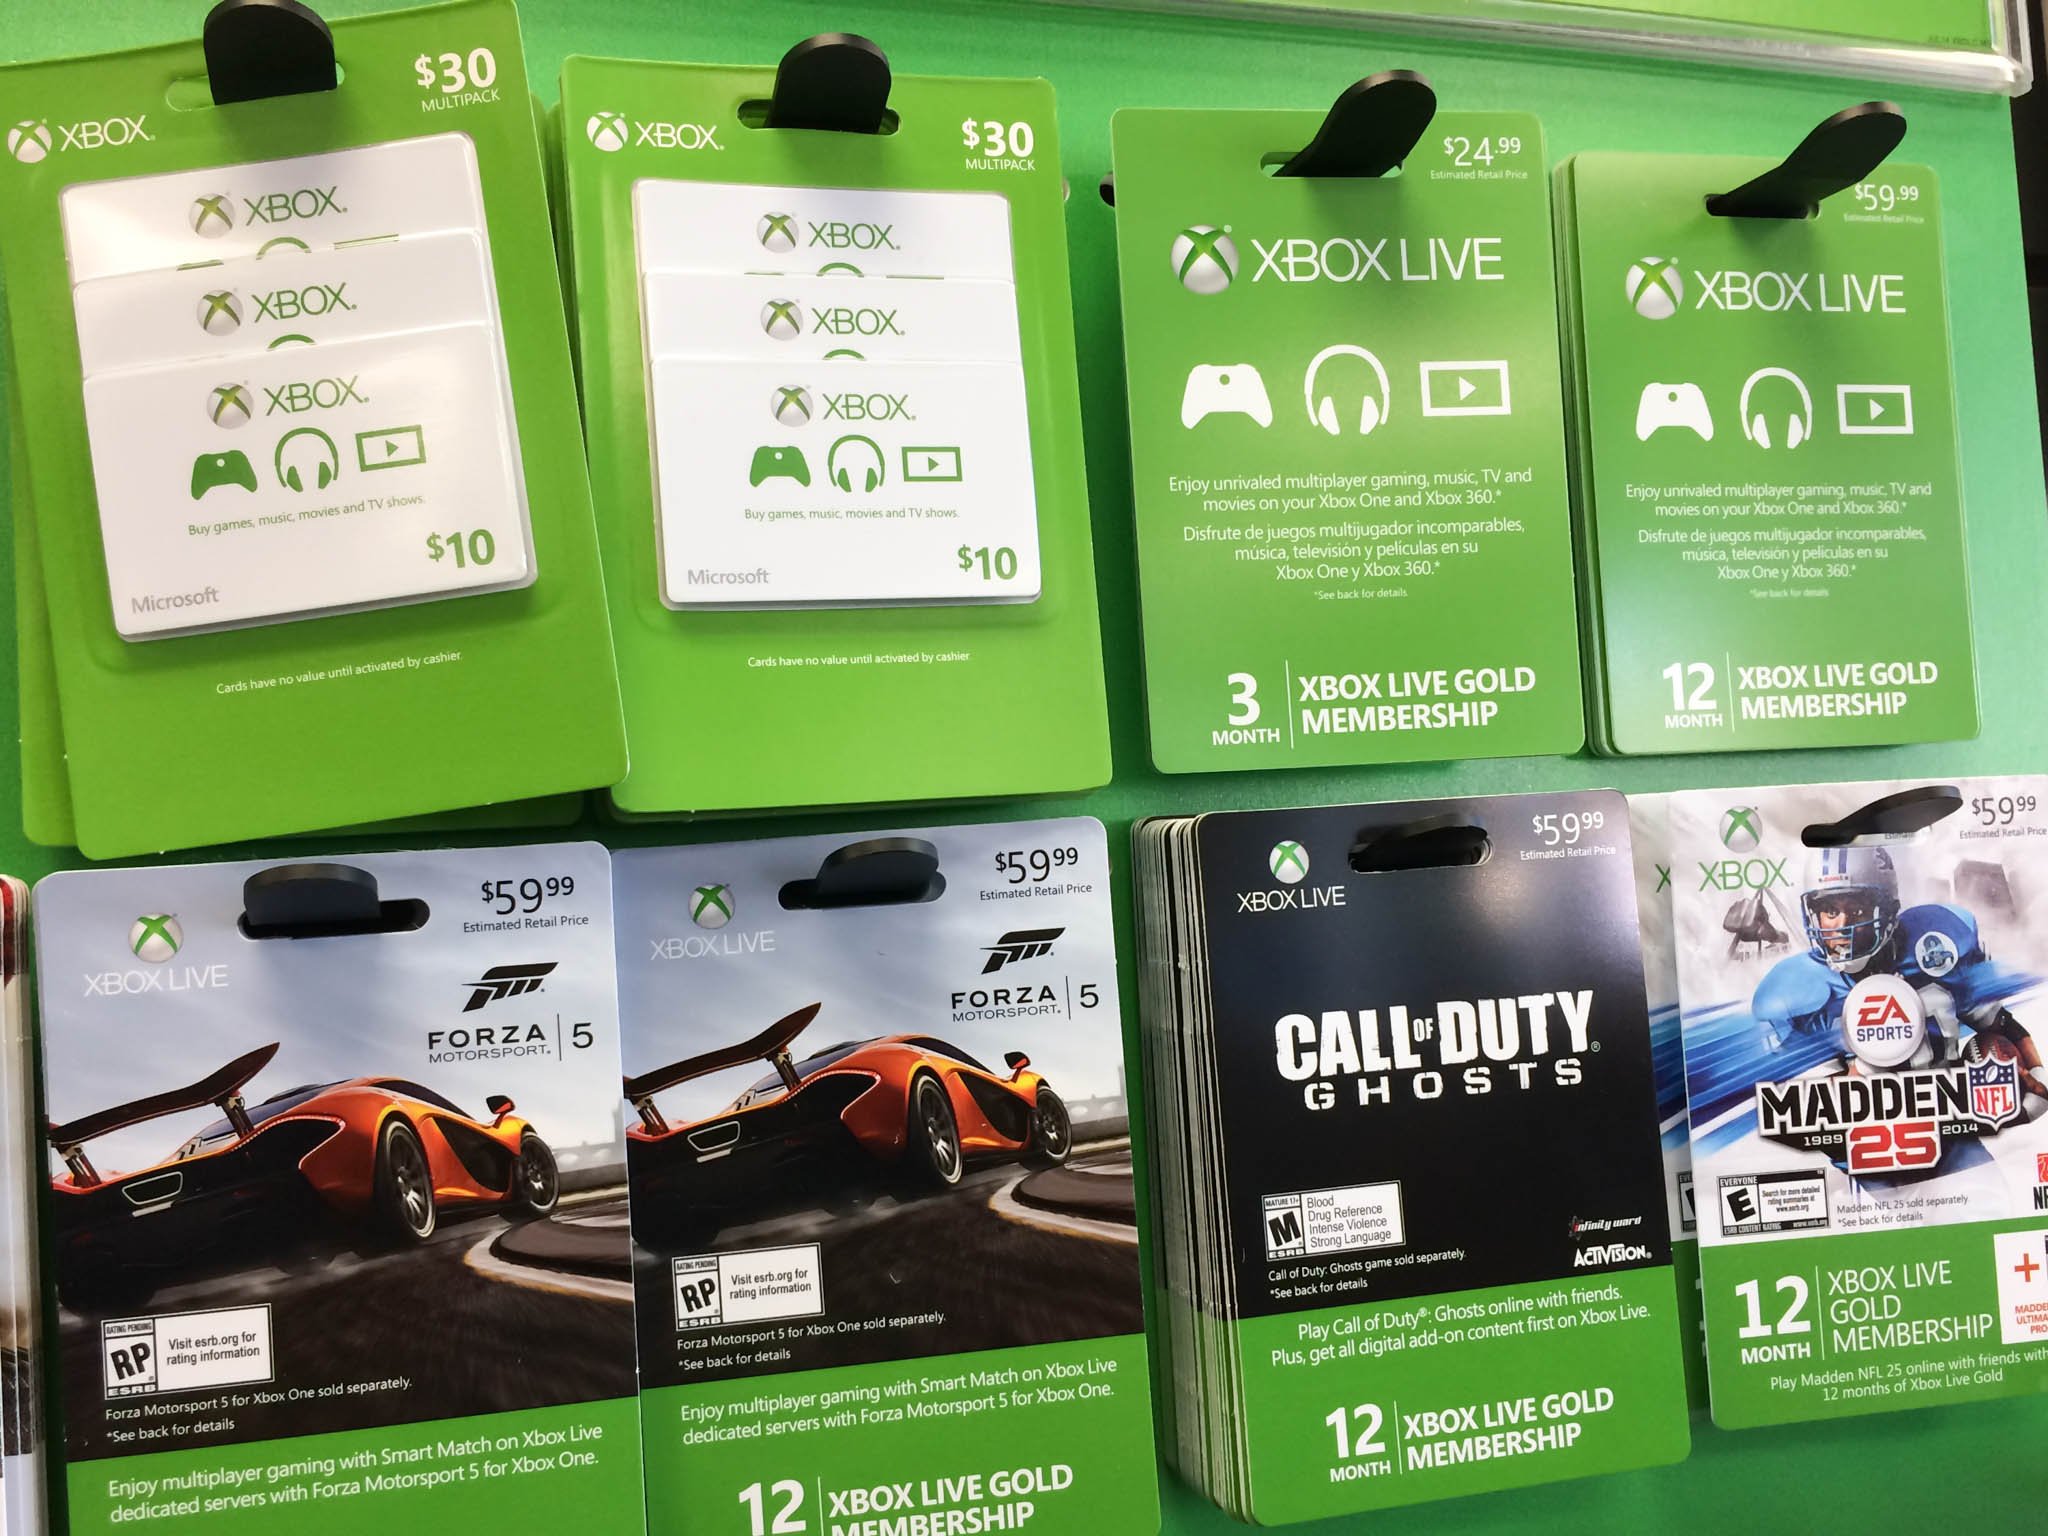 How to redeem Xbox One codes and gift cards | Central